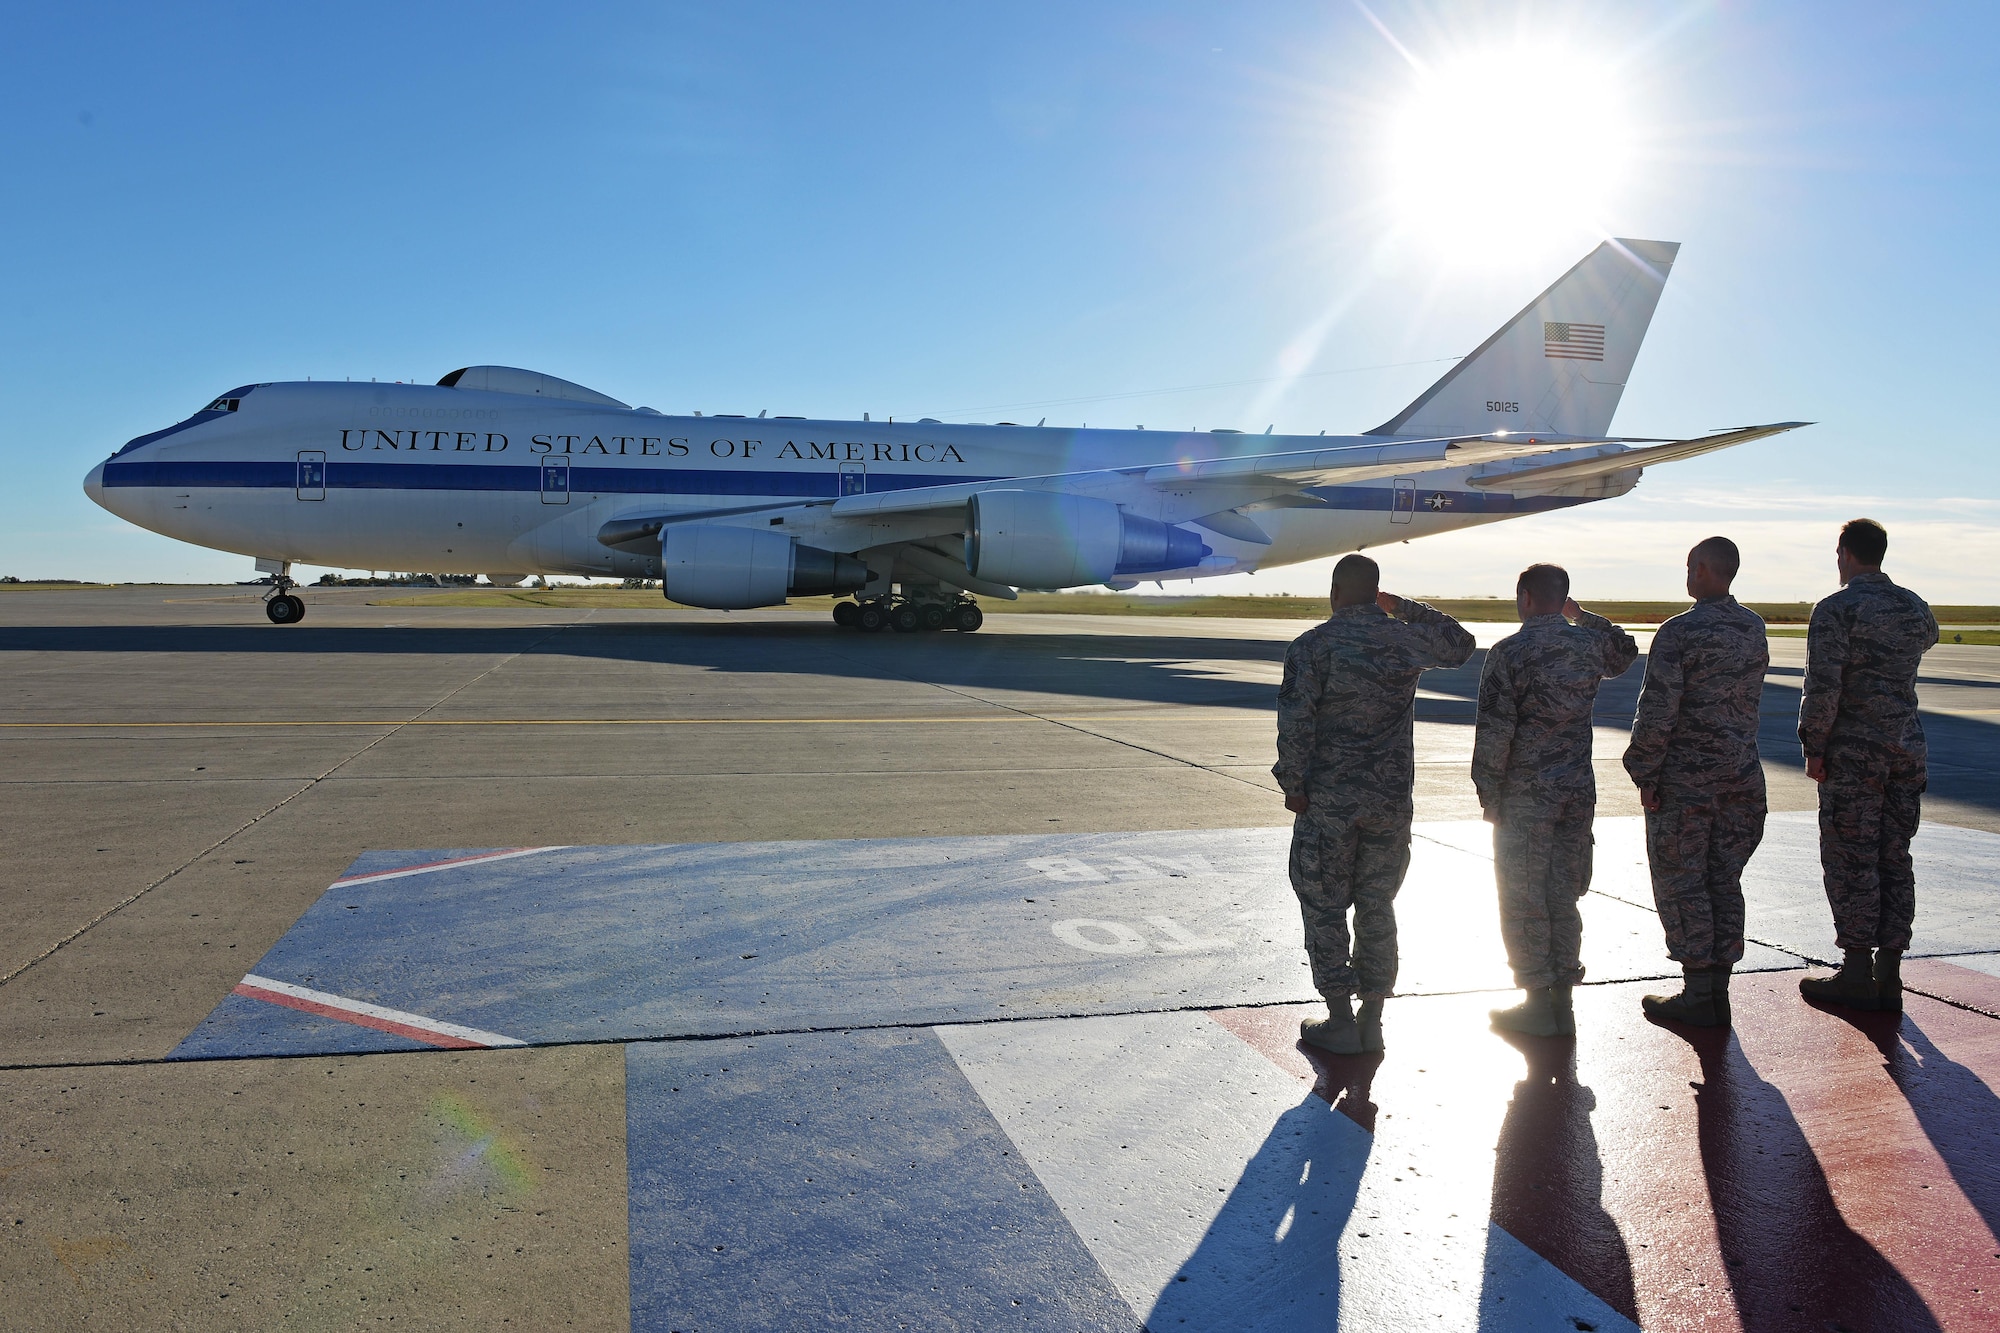 Team Minot leadership salutes U.S. Secretary of Defense Ashton Carter’s aircraft at Minot Air Force Base, N.D., Sept. 26, 2016. Carter spoke with Airmen from the 5th BW and 91st MW and toured several facilities to include a missile alert facility and a B-52H Stratofortress static display. To conclude his visit, Carter hosted a question and answer session with base personnel and recognized top performing Airmen. (U.S. Air Force photo/Airman 1st Class J.T. Armstrong)